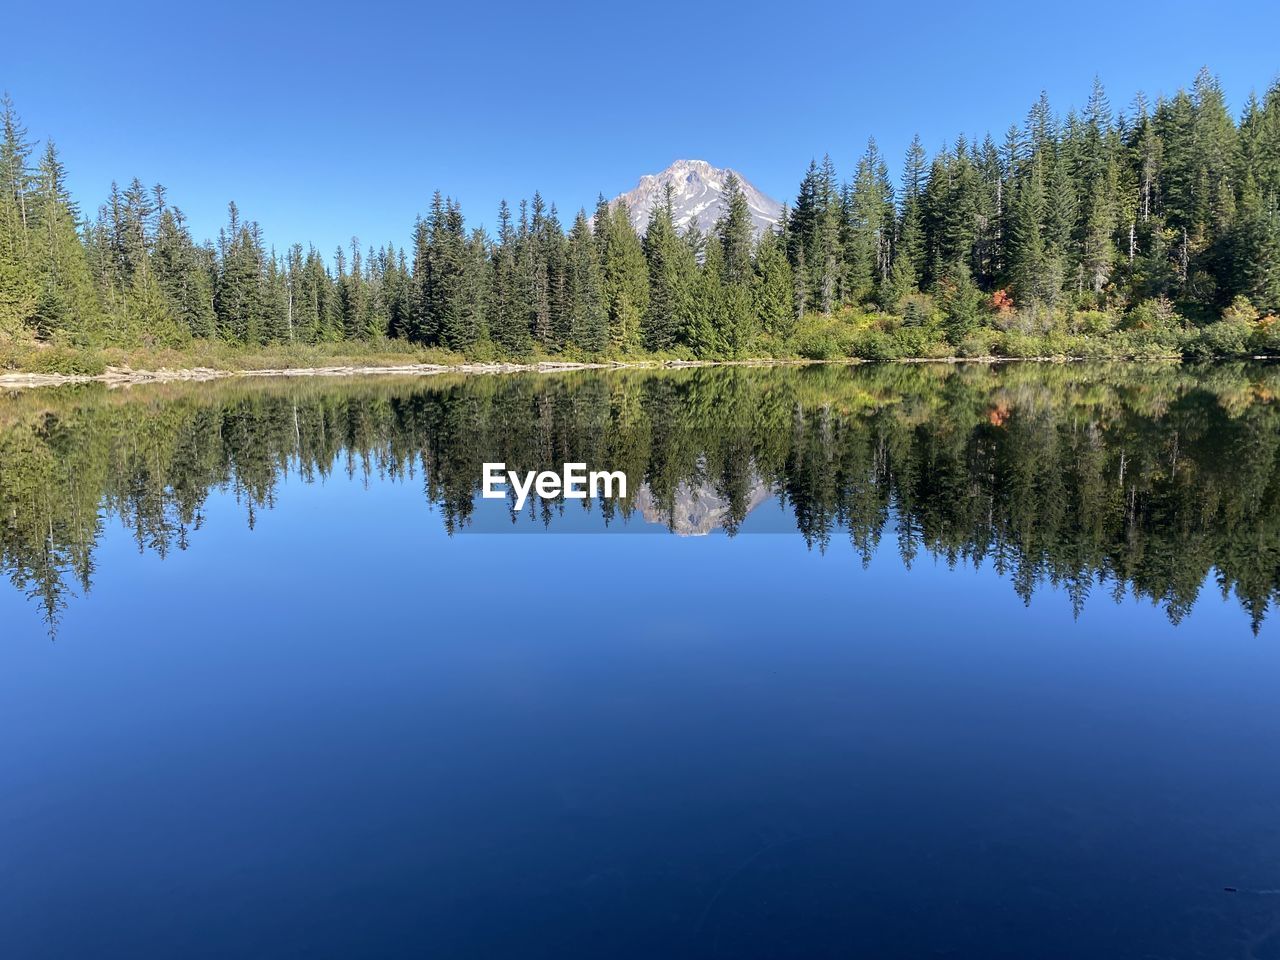 reflection, water, tree, lake, plant, scenics - nature, beauty in nature, wilderness, tranquility, sky, tranquil scene, nature, body of water, forest, blue, no people, pine tree, coniferous tree, land, non-urban scene, clear sky, pinaceae, landscape, reservoir, pine woodland, mountain, day, environment, travel destinations, outdoors, idyllic, woodland, travel, autumn, standing water